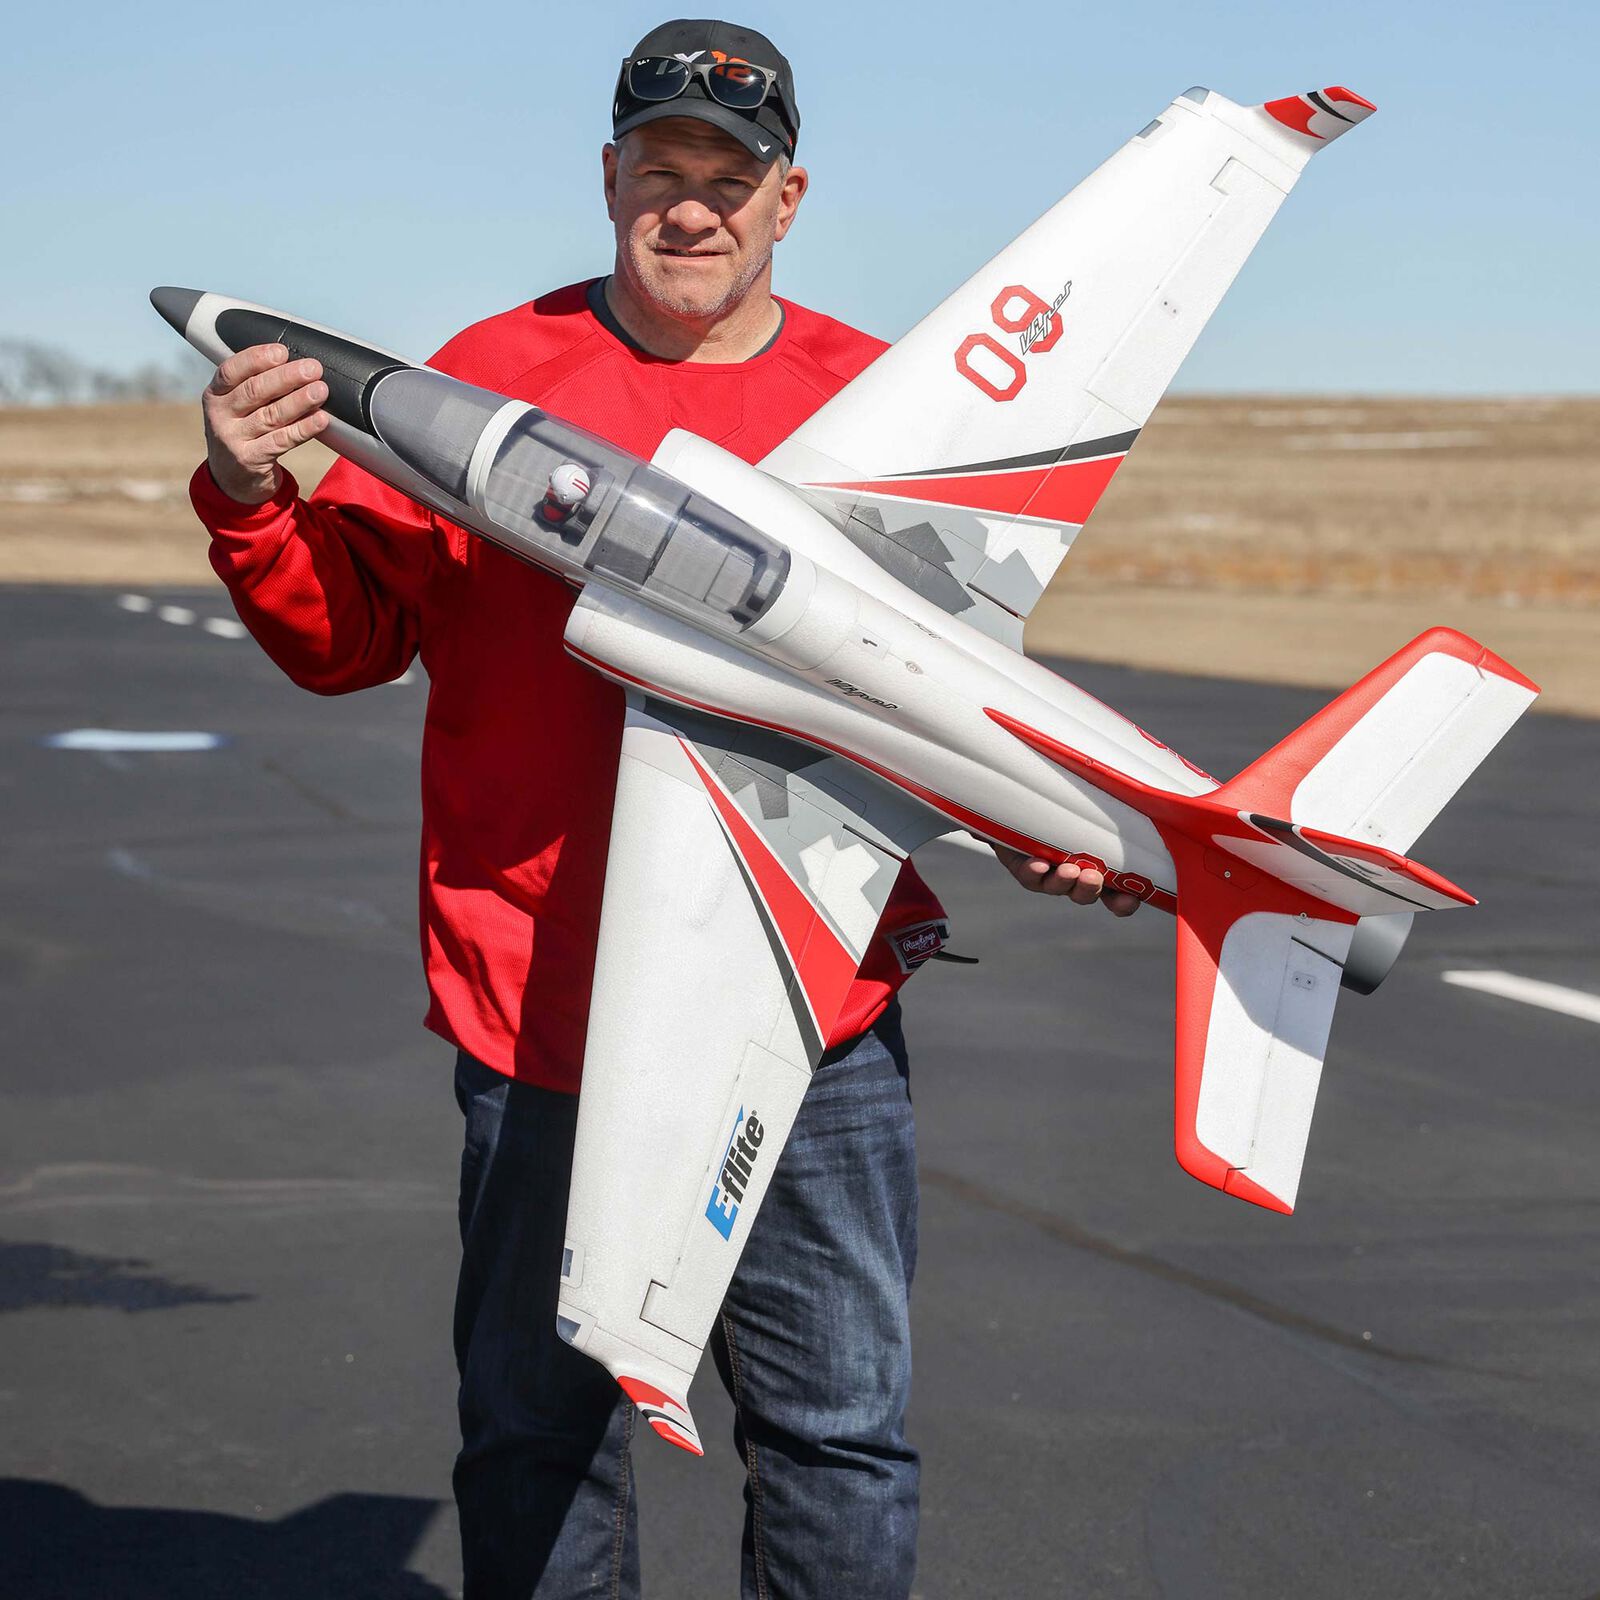 E-Flite Viper 90mm EDF Jet ARF (without Power System)